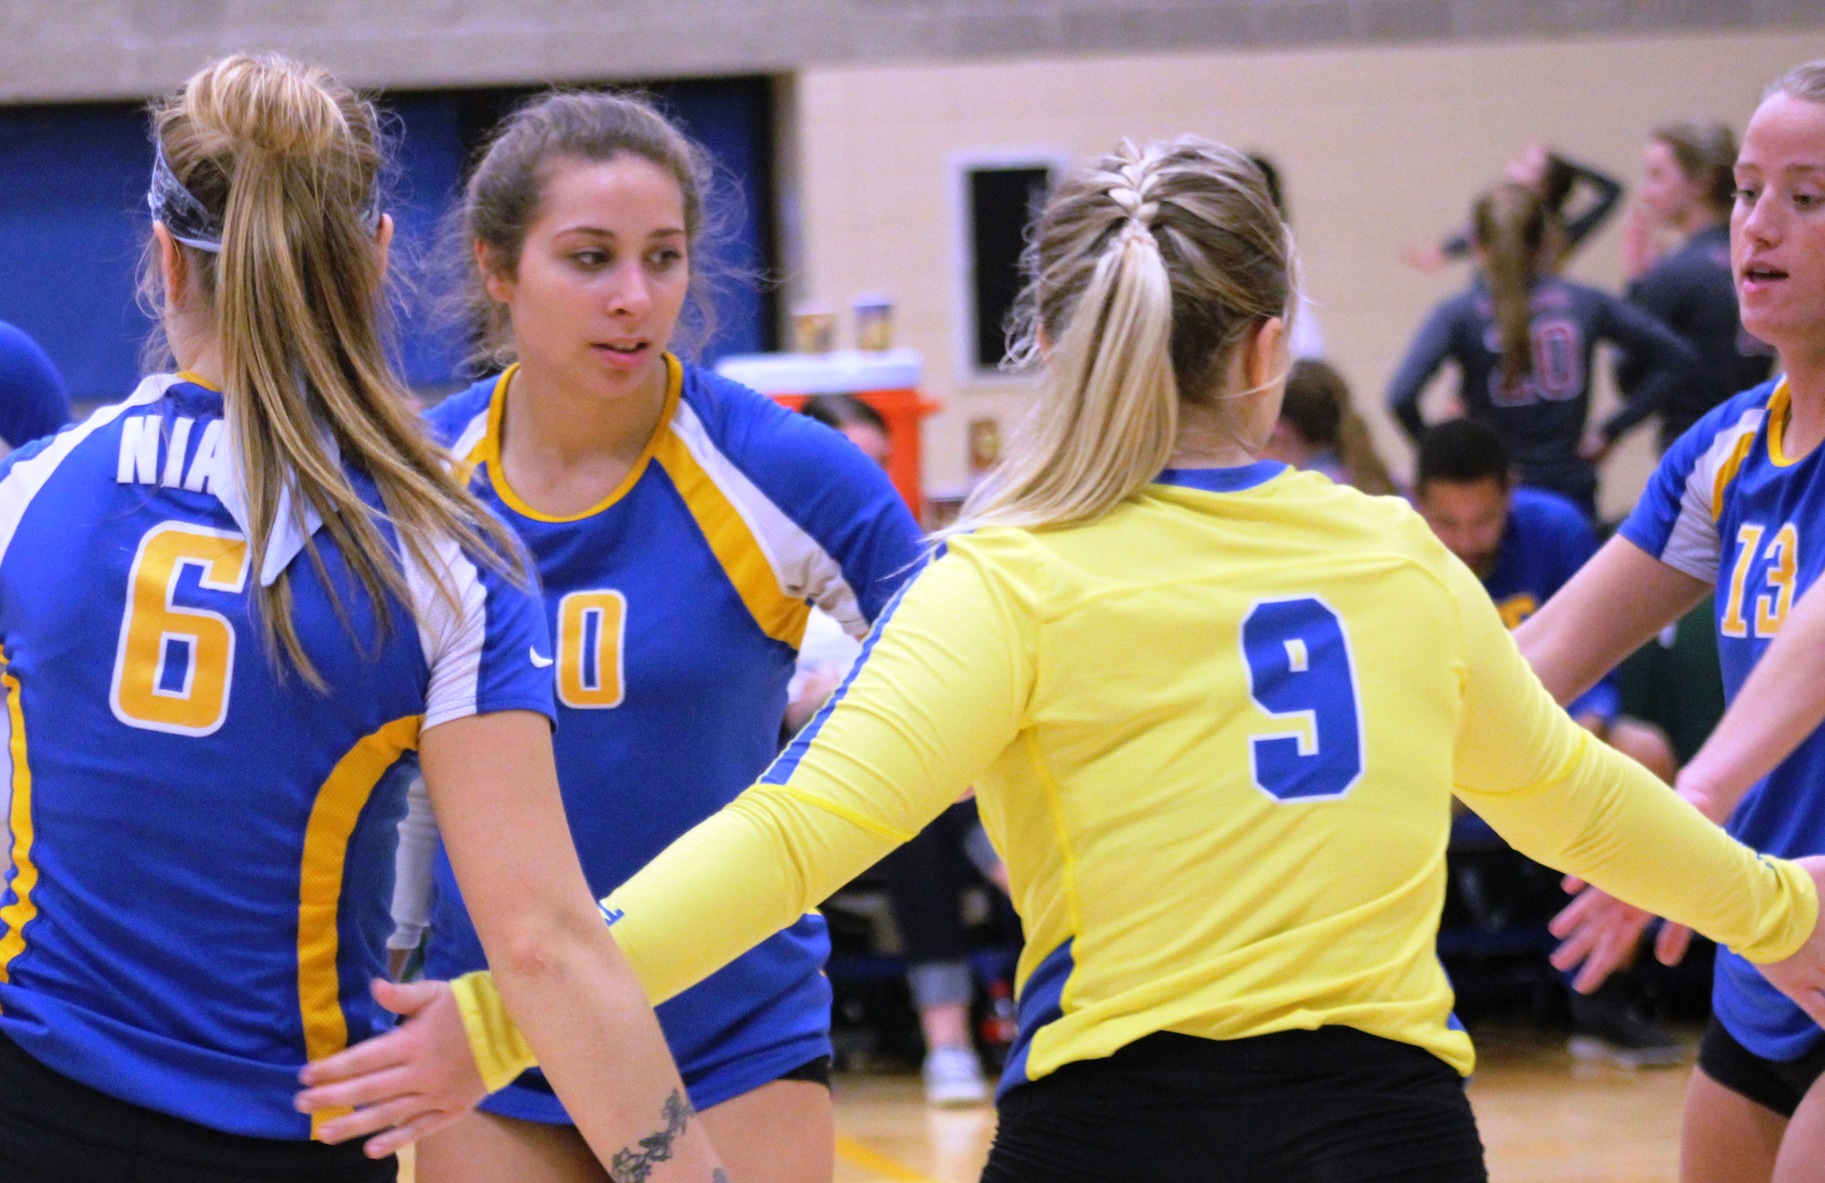 NIACC players celebrate a point in last weekend's NIACC volleyball tournament.